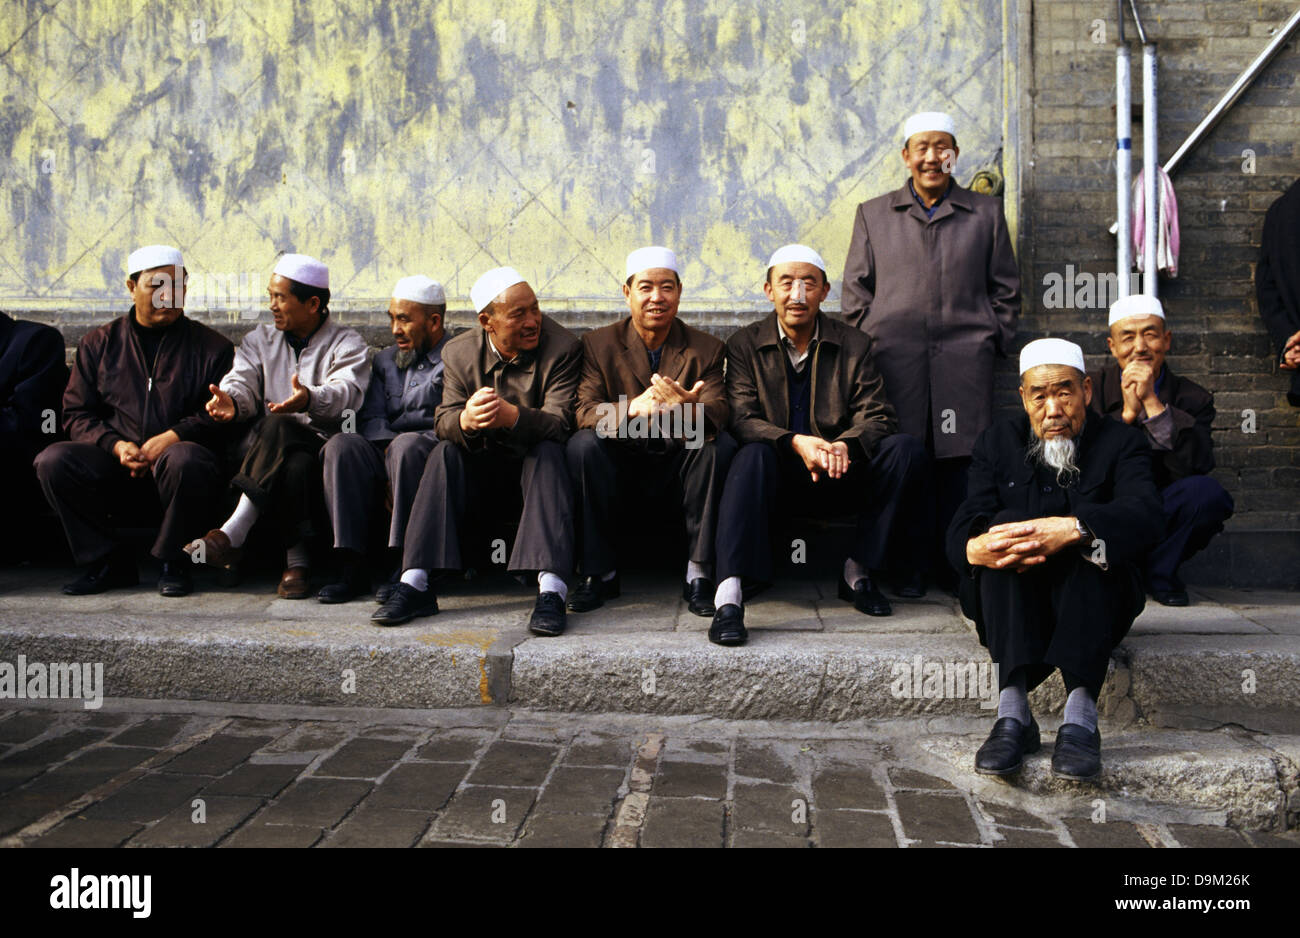 Hui Muslims men in the courtyard of Dongguan Grand Mosque originally built in 1380 in Xining the capital of Qinghai province in western China Stock Photo